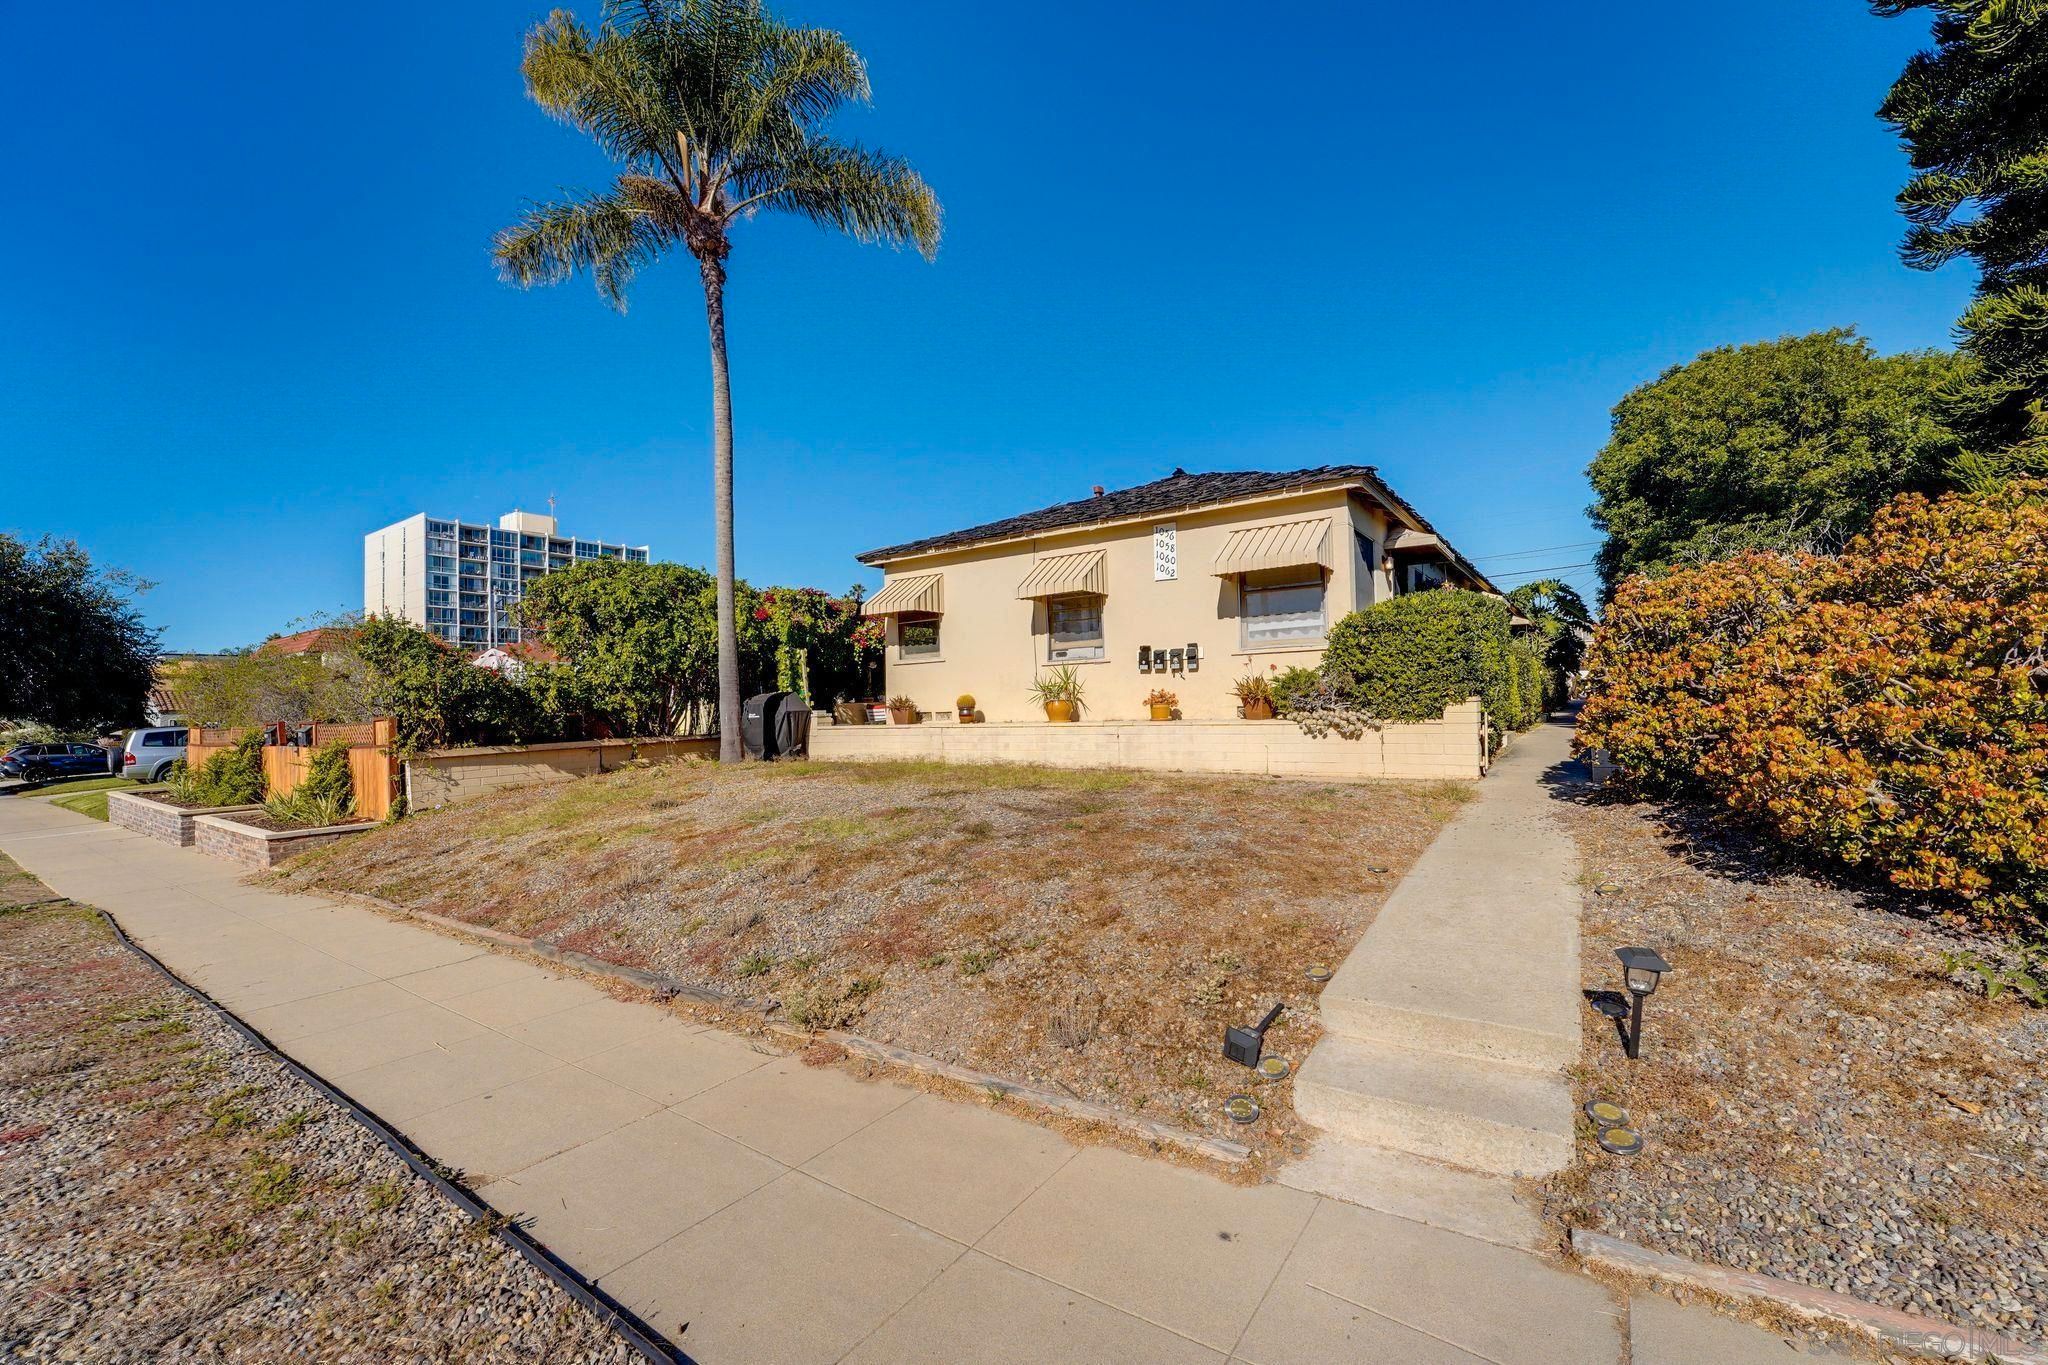 Main Photo: PACIFIC BEACH Property for sale: 1056-62 BERYL STREET in SAN DIEGO